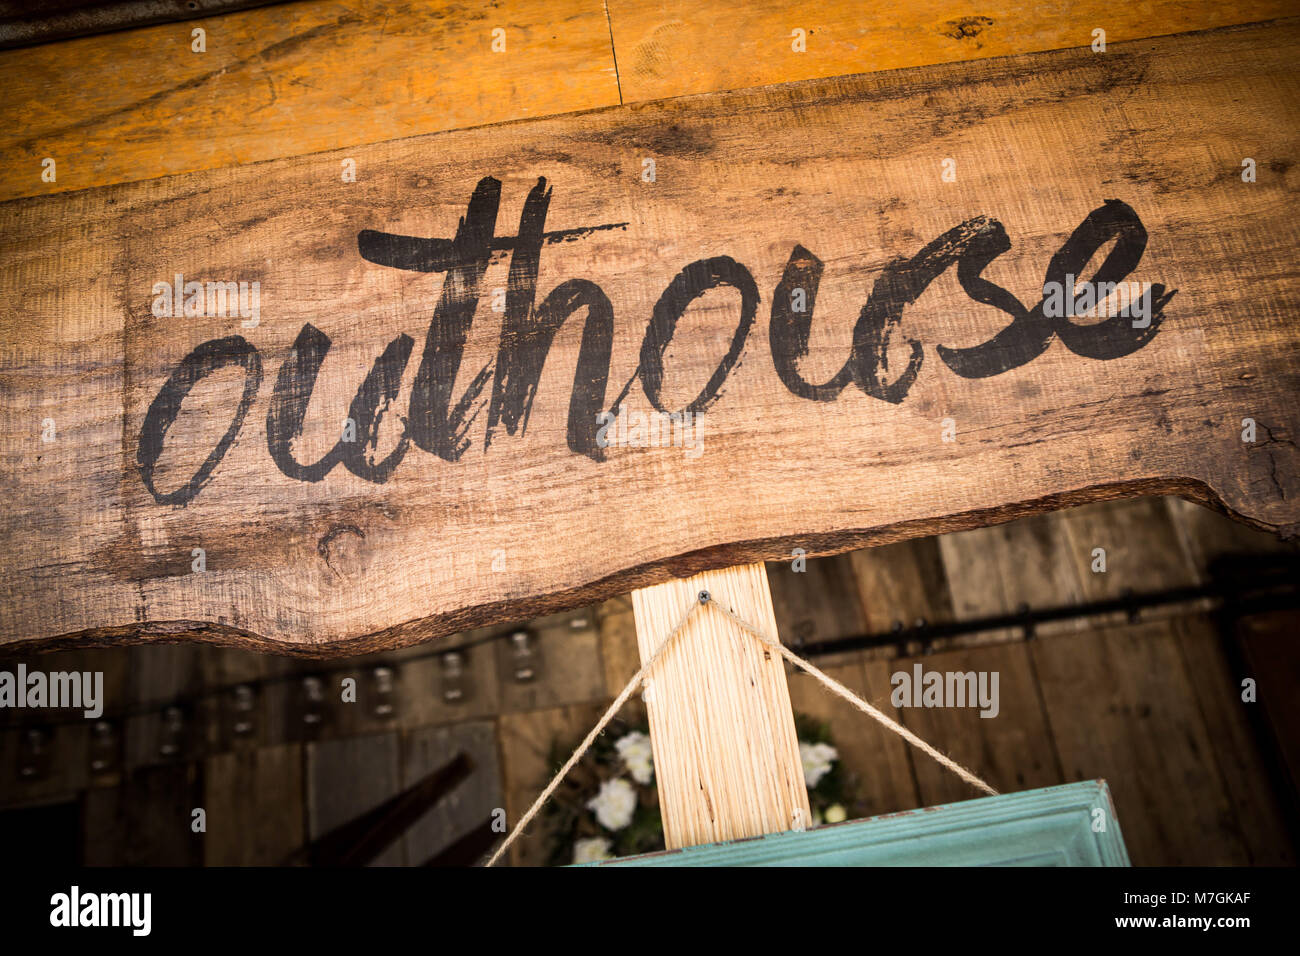 Black handwritten Outhouse sign on unpainted wooden board in close-up Stock Photo